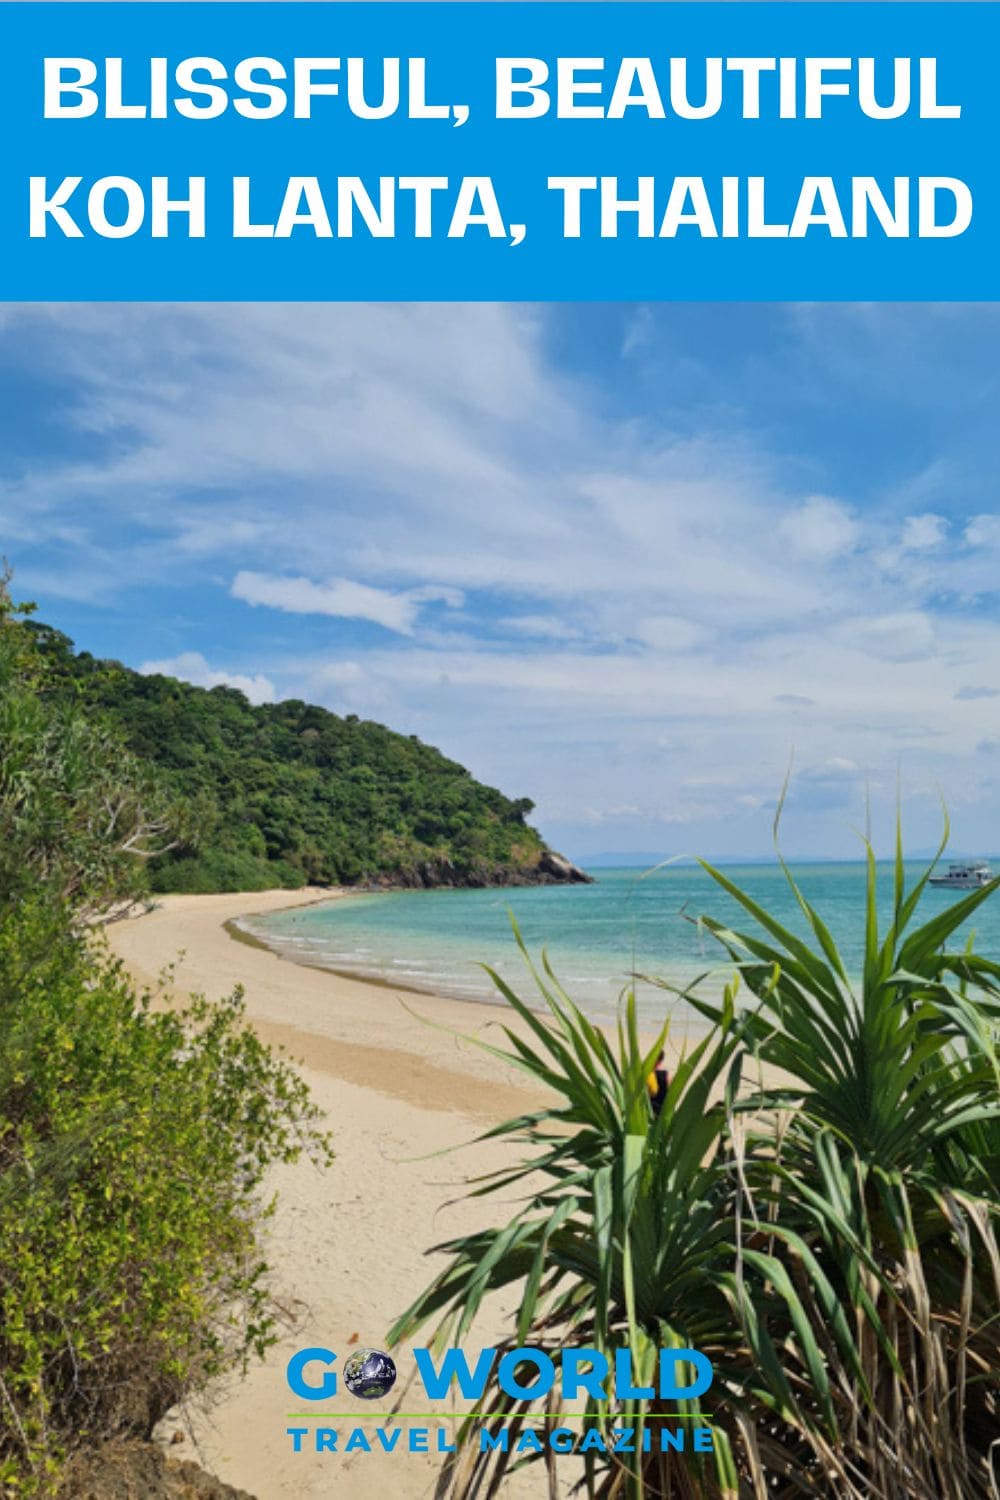 Tired of everyday hustle & bustle? Visit Koh Lanta for a simple blissful escape. Enjoy the white sand, jade-green ocean, and local cuisine. #Thailand #Kohlanta